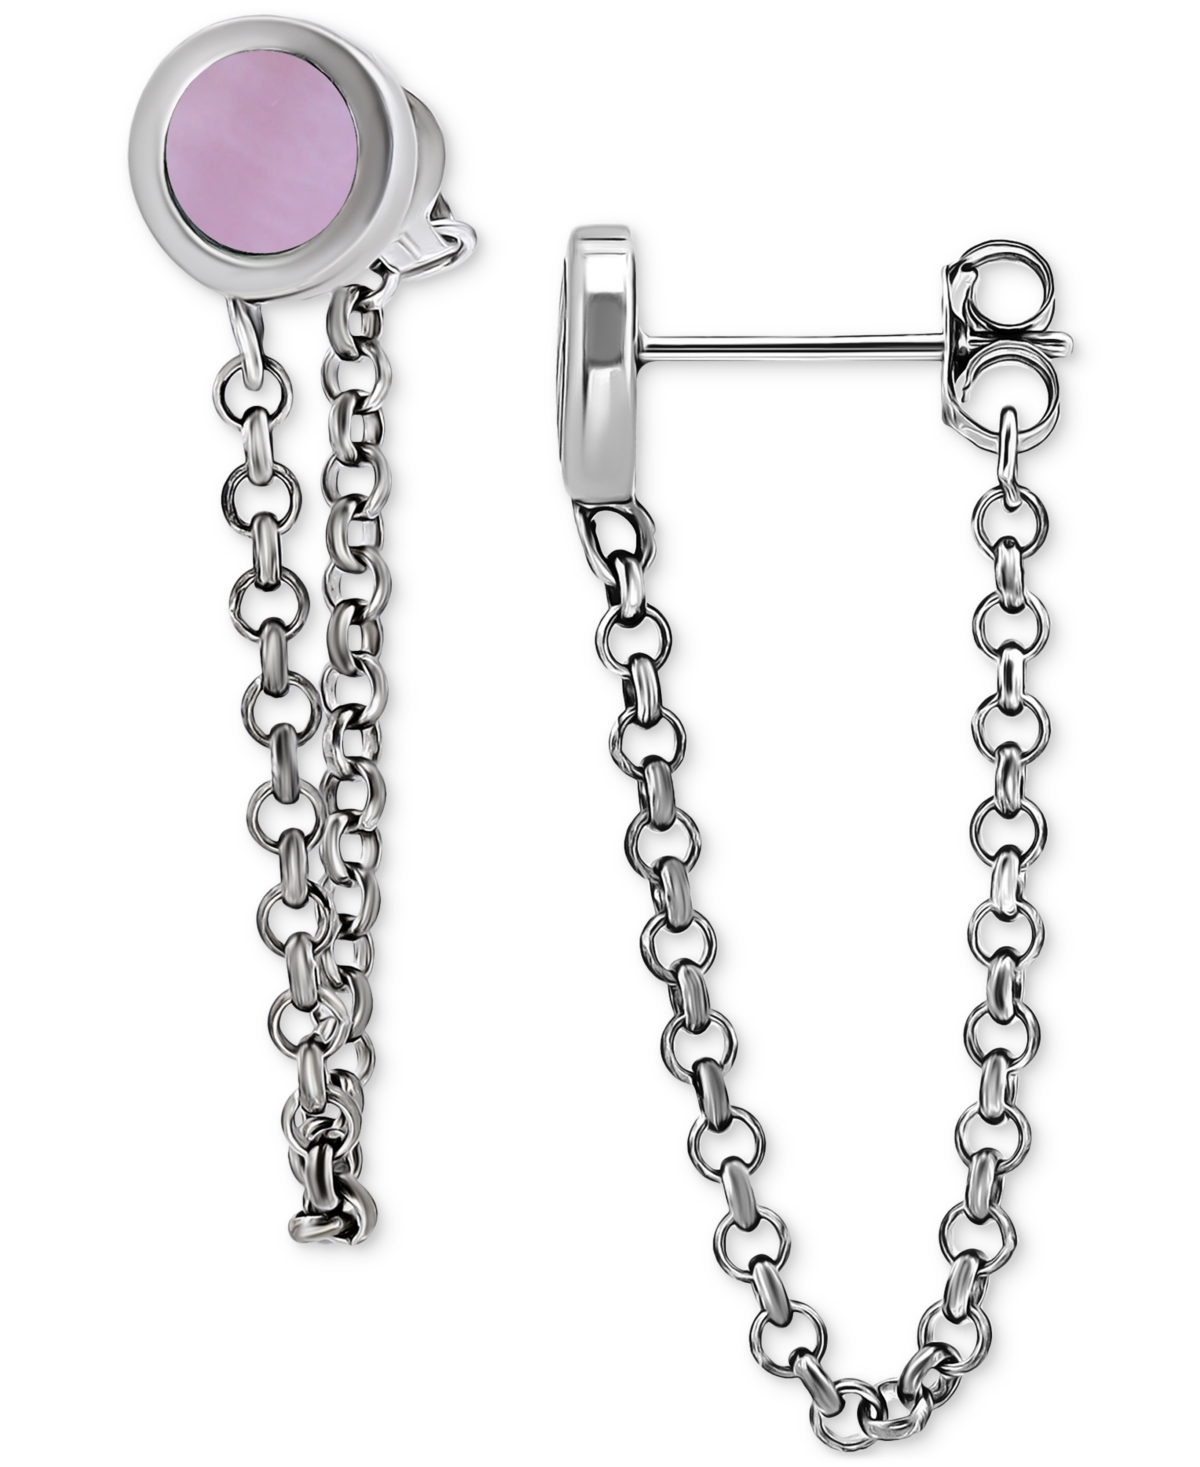 Abalone Chain Front and Back Drop Earrings in Sterling Silver (Also in Pink Shell), Created for Macy's - Abalone